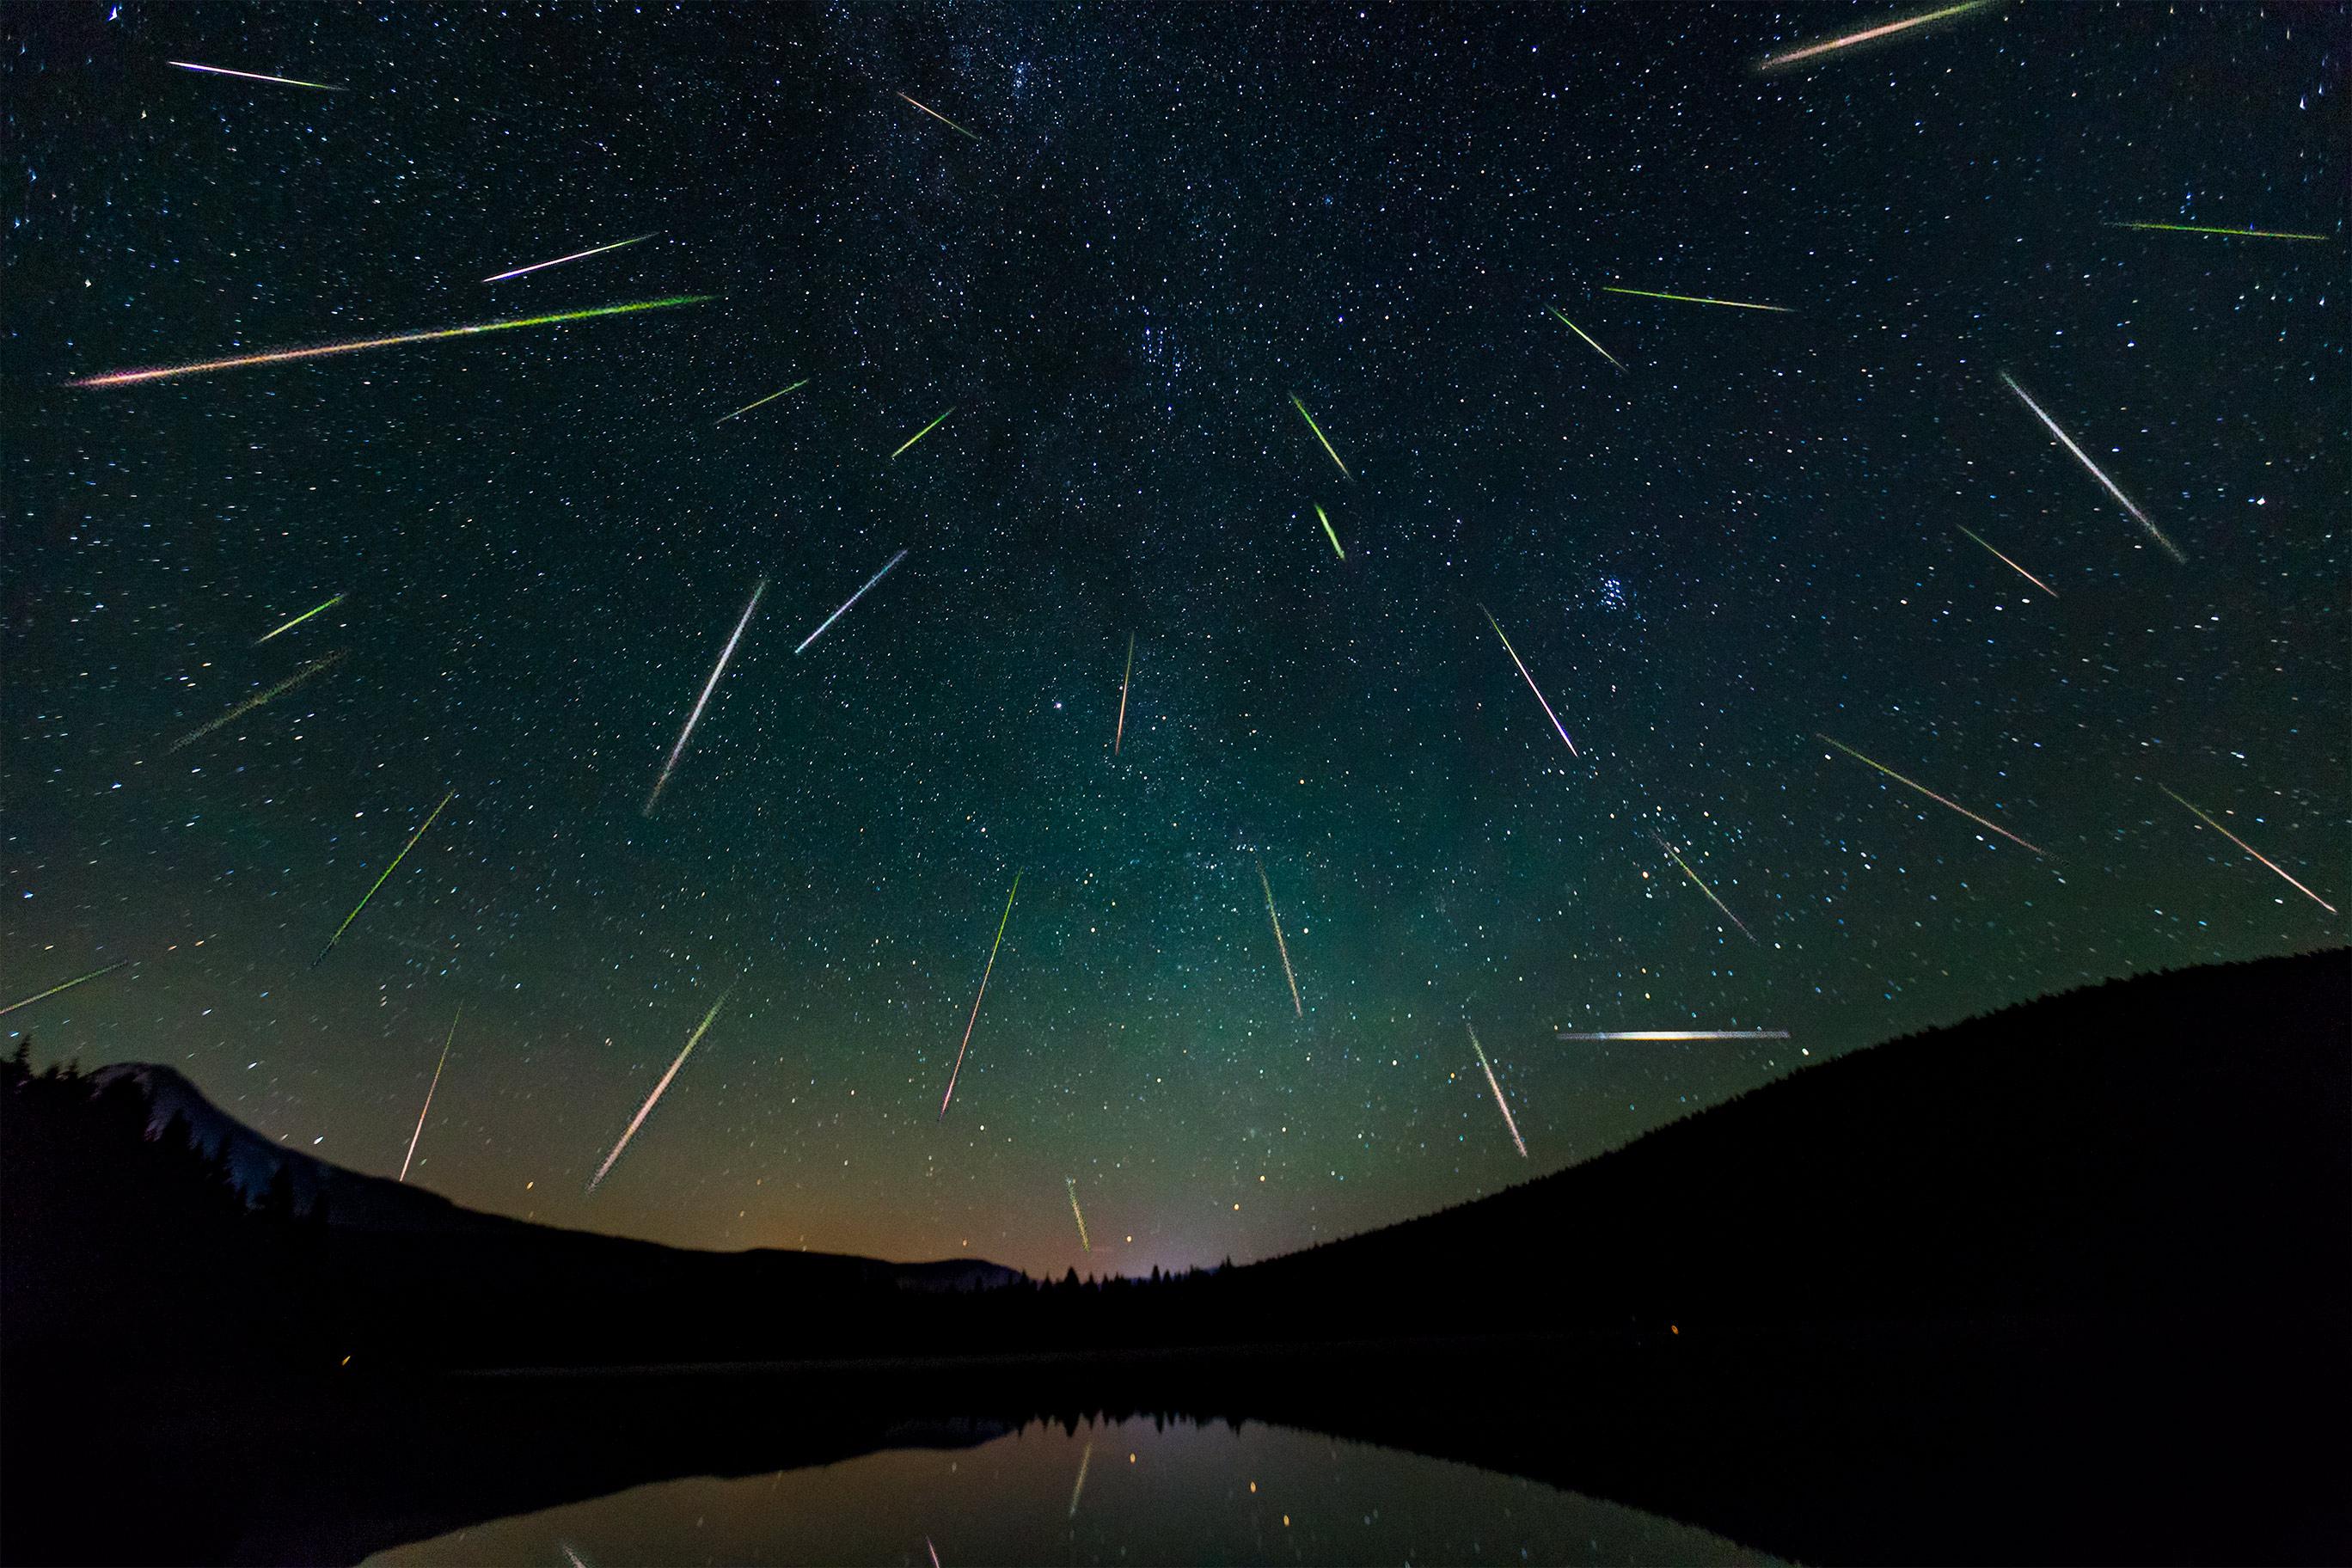 A meteor shower in the night sky.